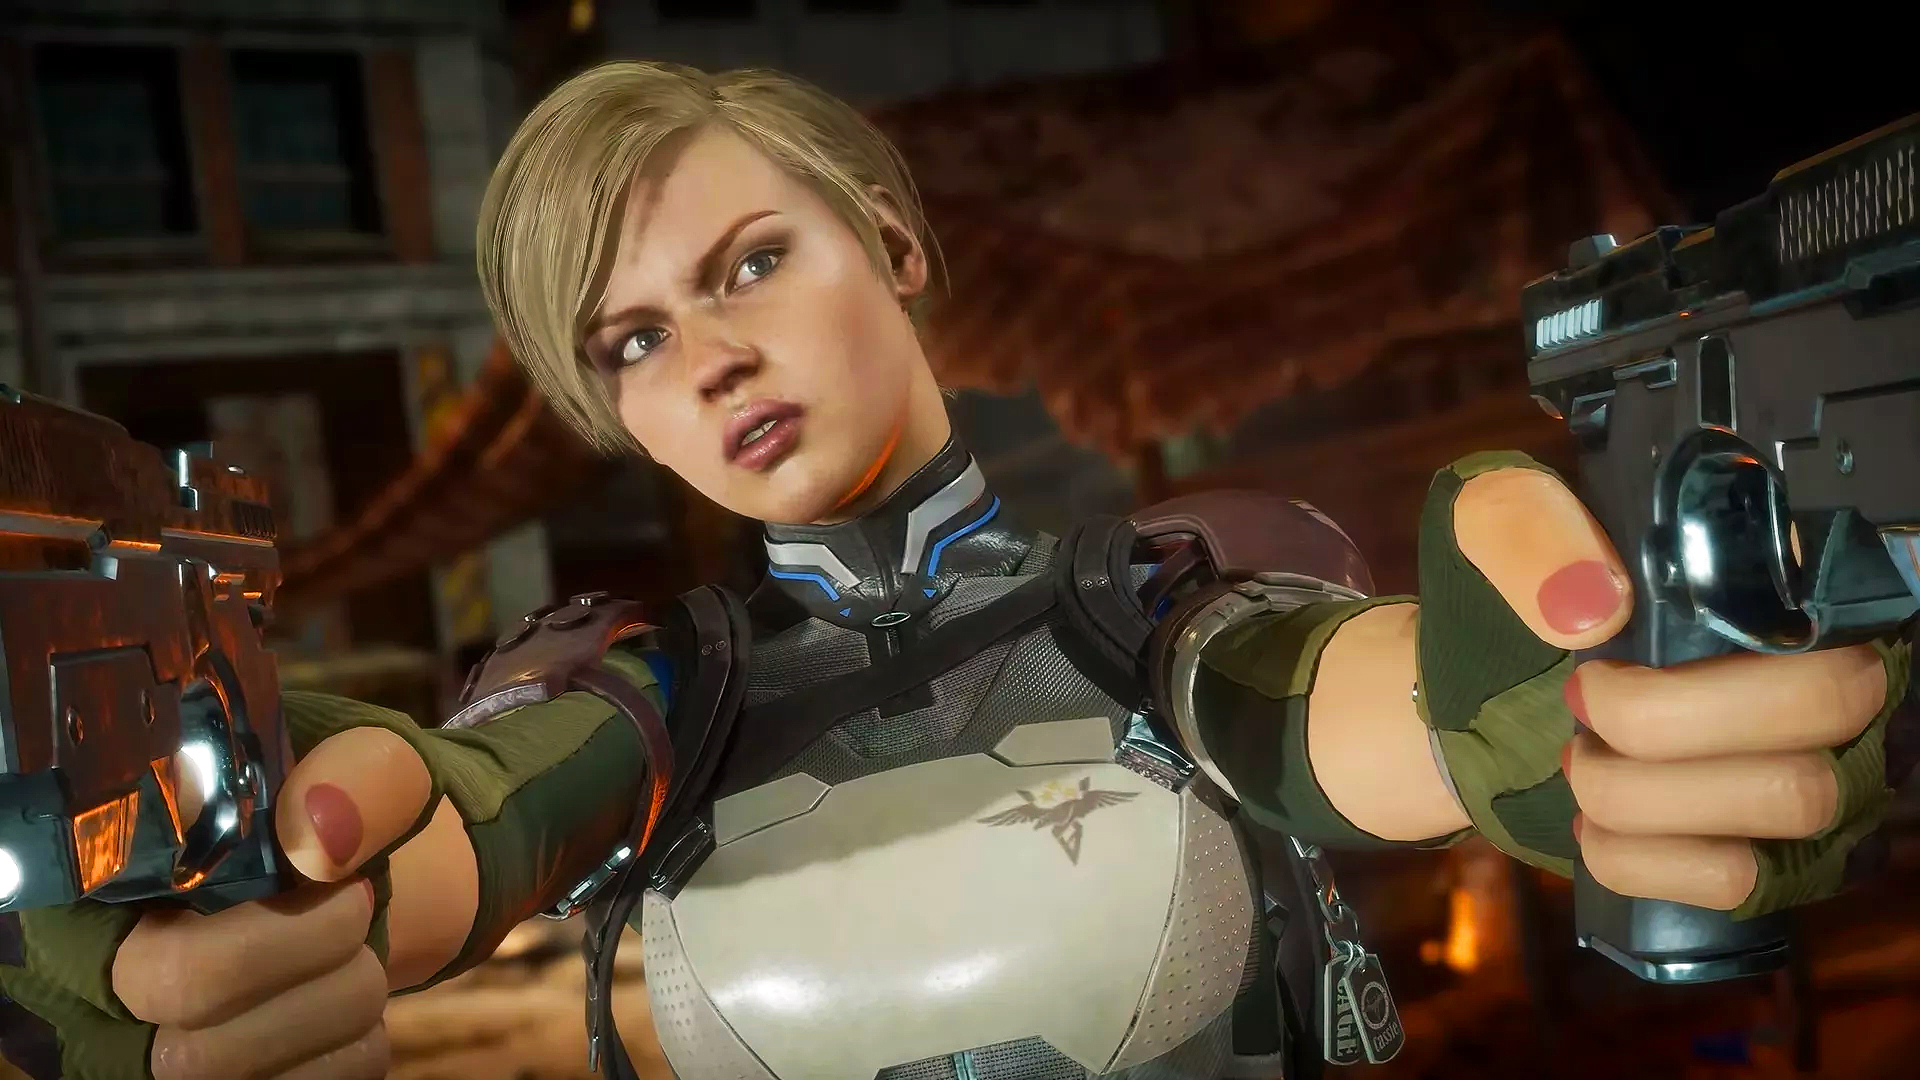 Cassie Cage follows her parents in Mortal Kombat 11.